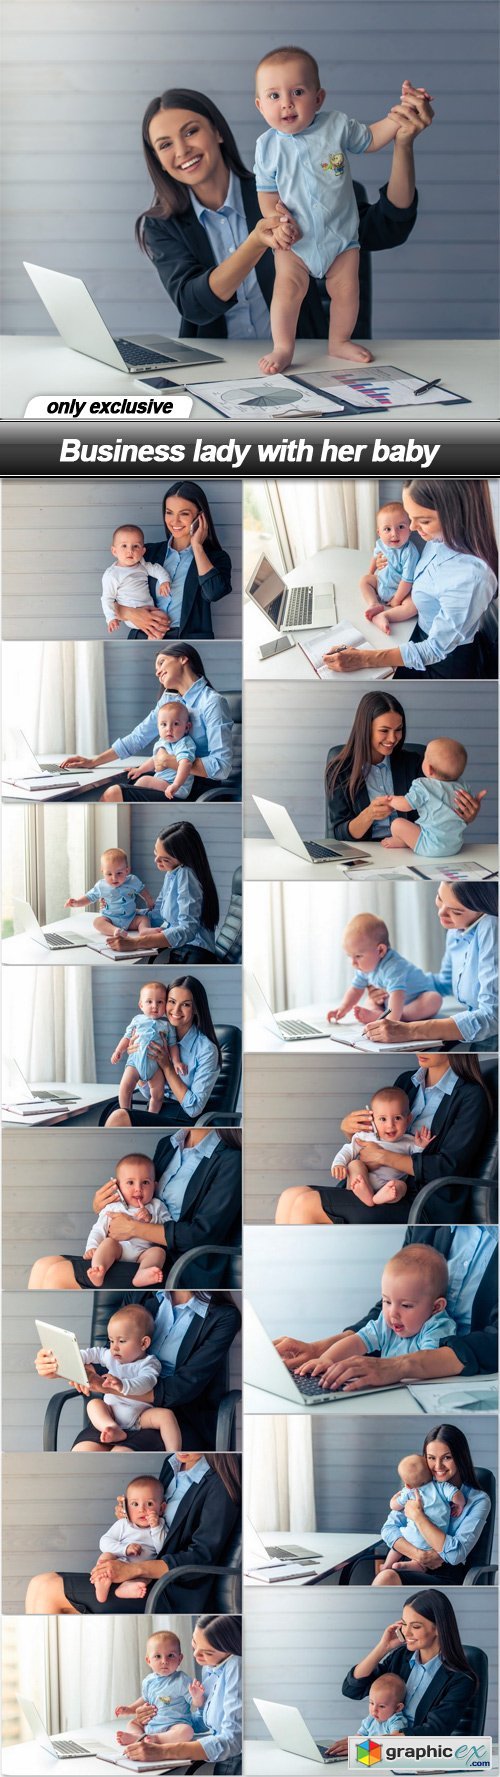 Business lady with her baby - 16 UHQ JPEG